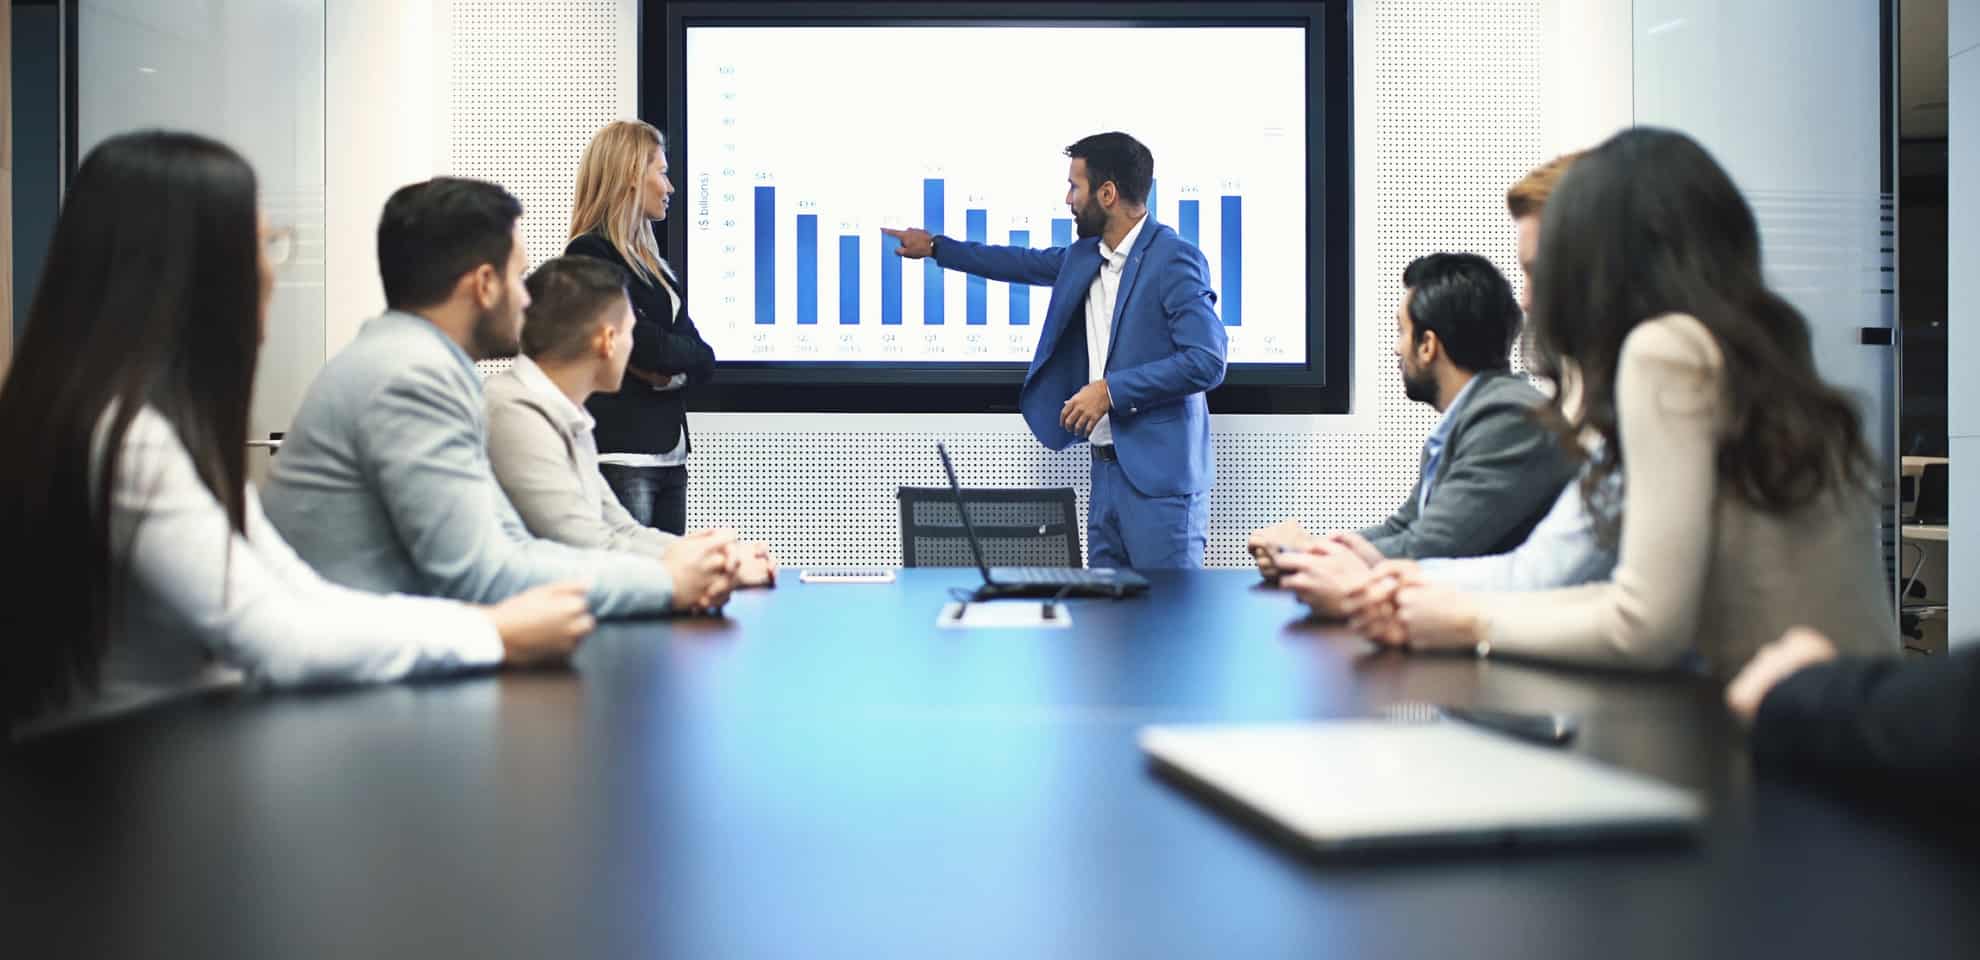 7 Tips for More Effective Company Profile Presentations